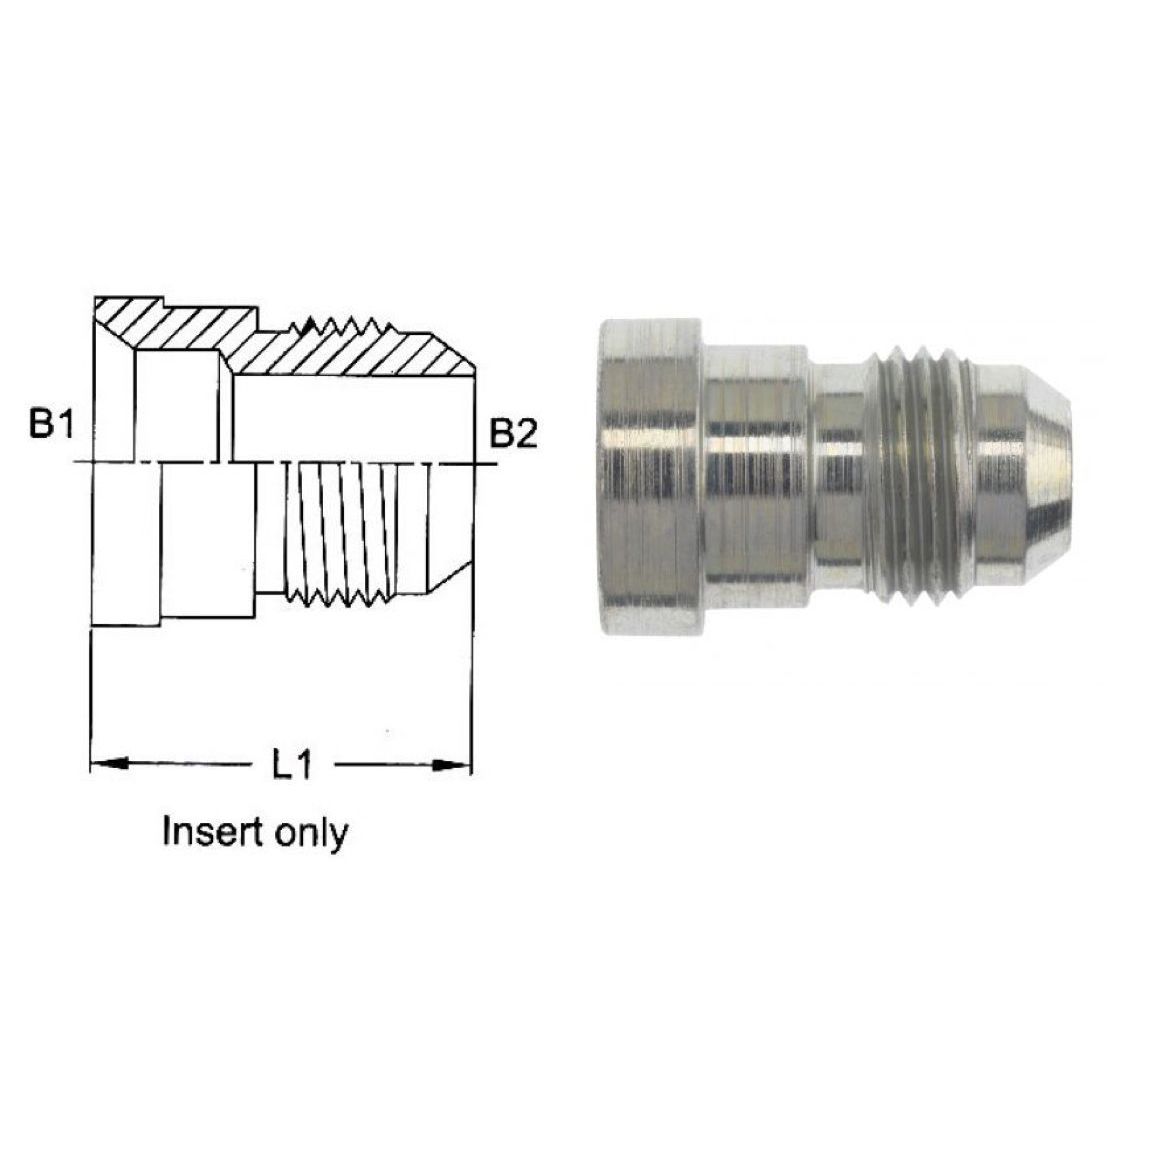 2406-08-06-IN-SS : OneHydraulics  Straight Reducer, Insert only, Straight, 0.5 (1/2") Female JIC x 0.375 (3/8") Male, Stainless Steel, 7200psi